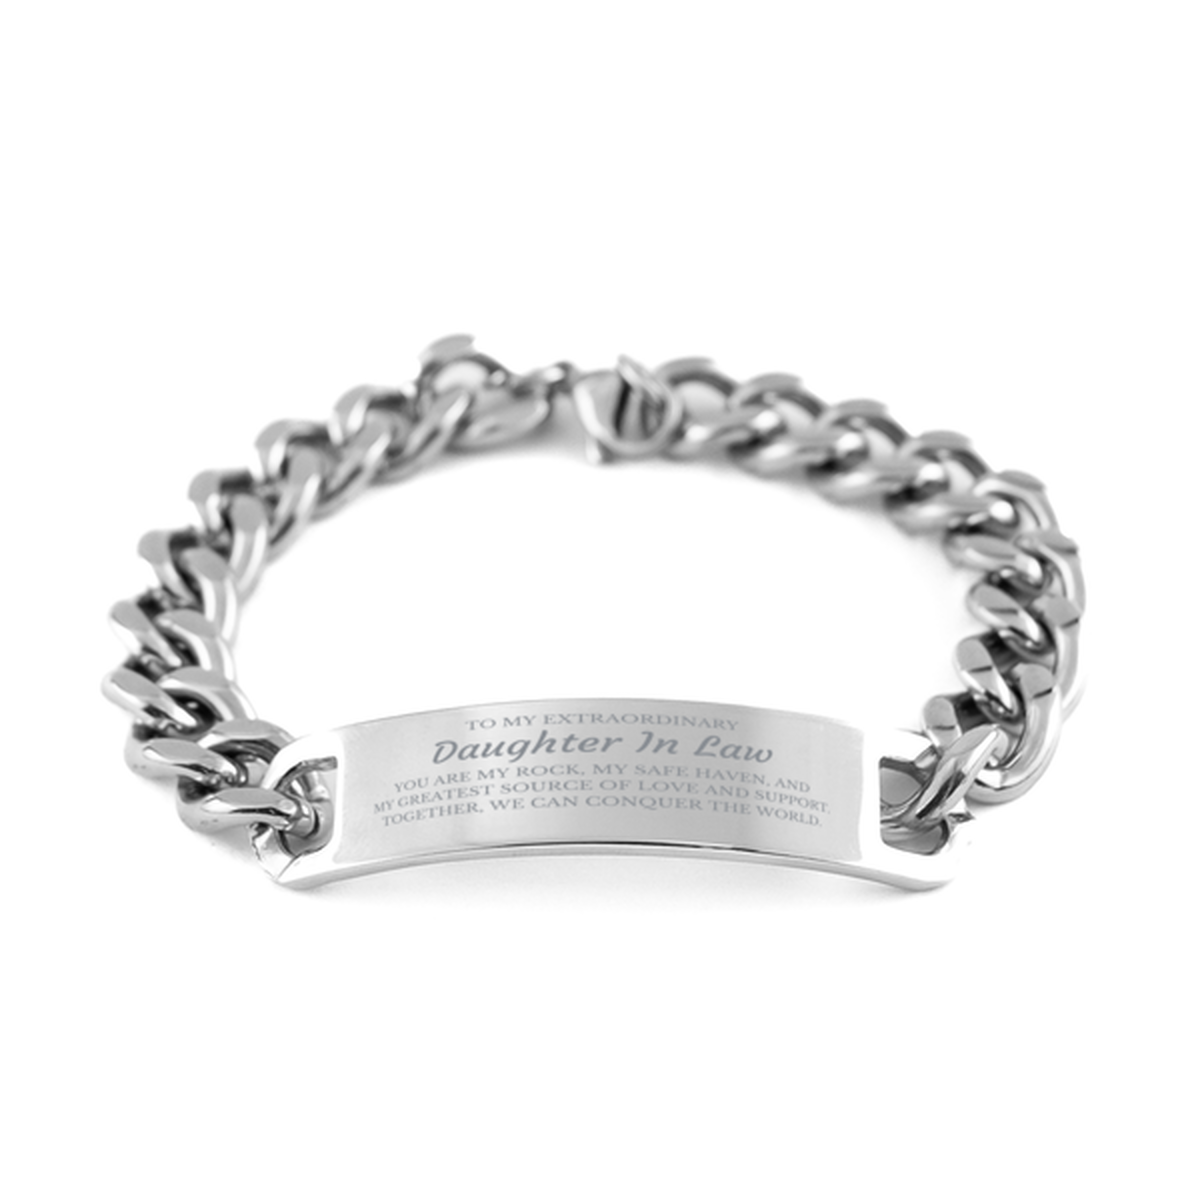 To My Extraordinary Daughter In Law Gifts, Together, we can conquer the world, Birthday Cuban Chain Stainless Steel Bracelet For Daughter In Law, Christmas Gifts For Daughter In Law